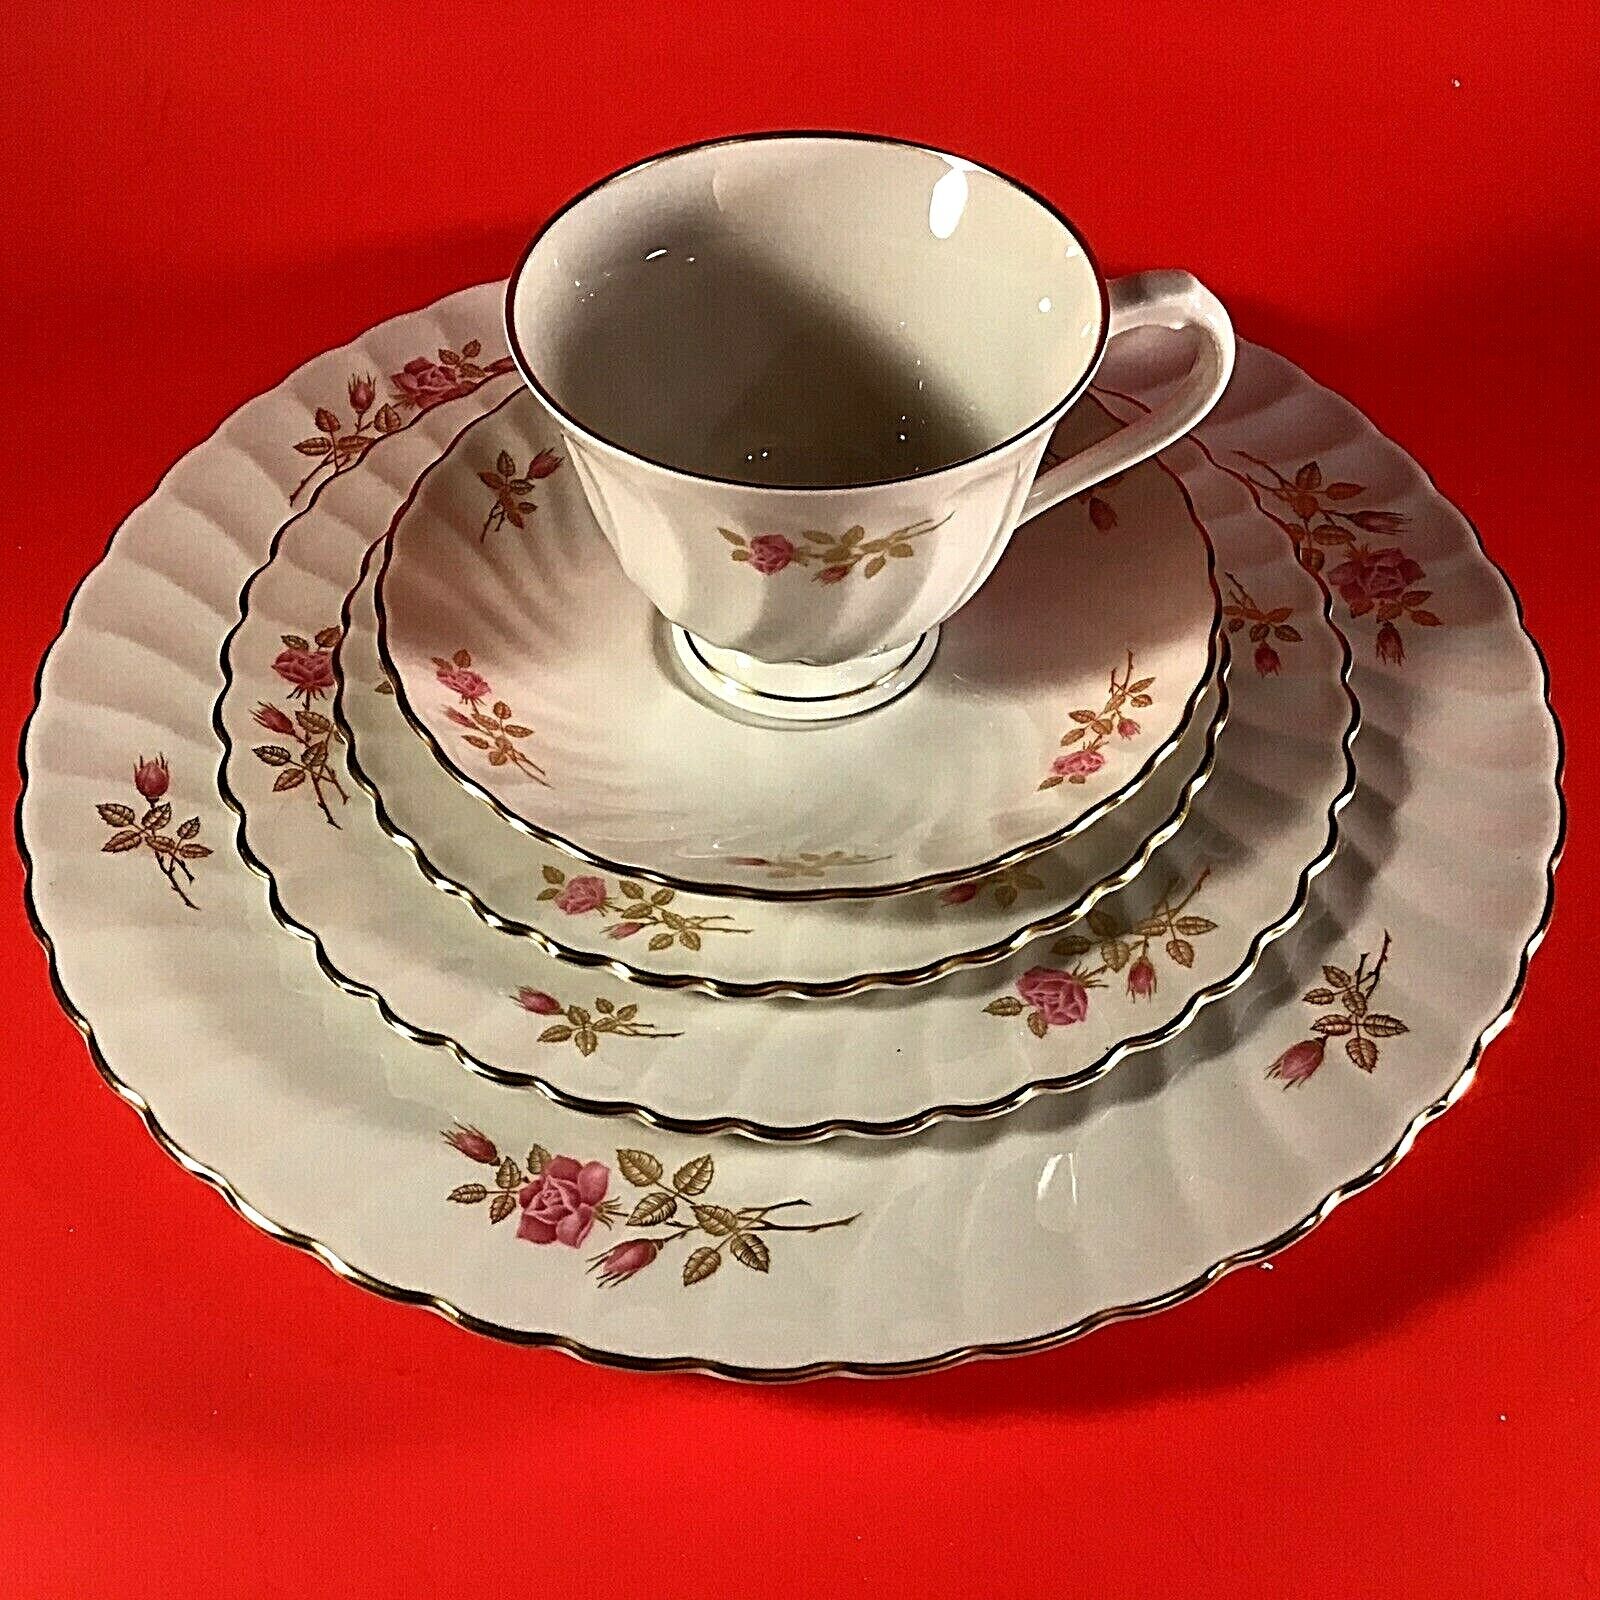 SYRACUSE CHINA COURTSHIP SILHOUETTE 5 PIECE PLACE SETTING PINK AND GOLD FLORAL syracuse china - фотография #8